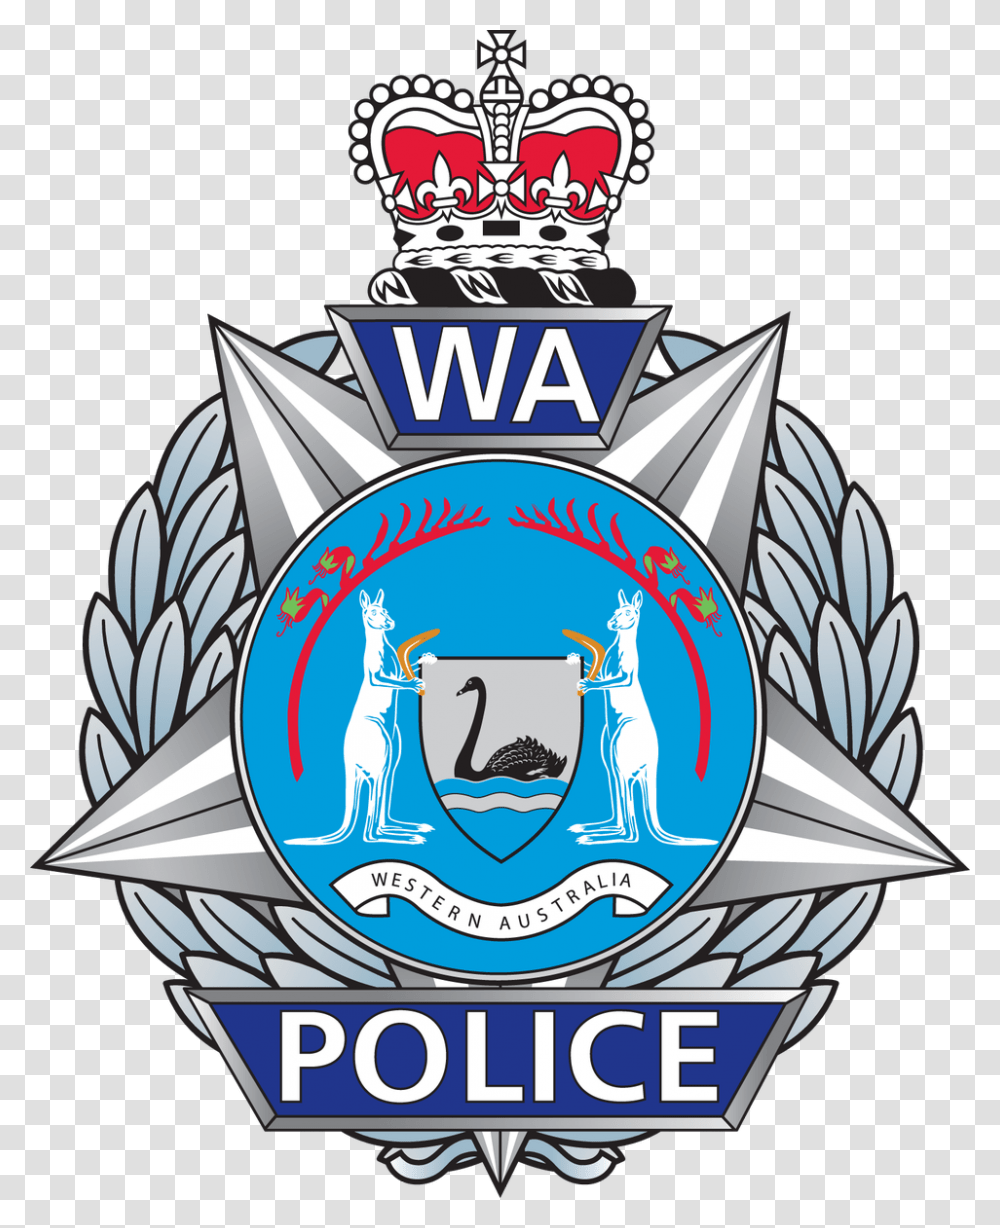 Wa Police Forceverified Account Wa Police Force, Label, Logo Transparent Png